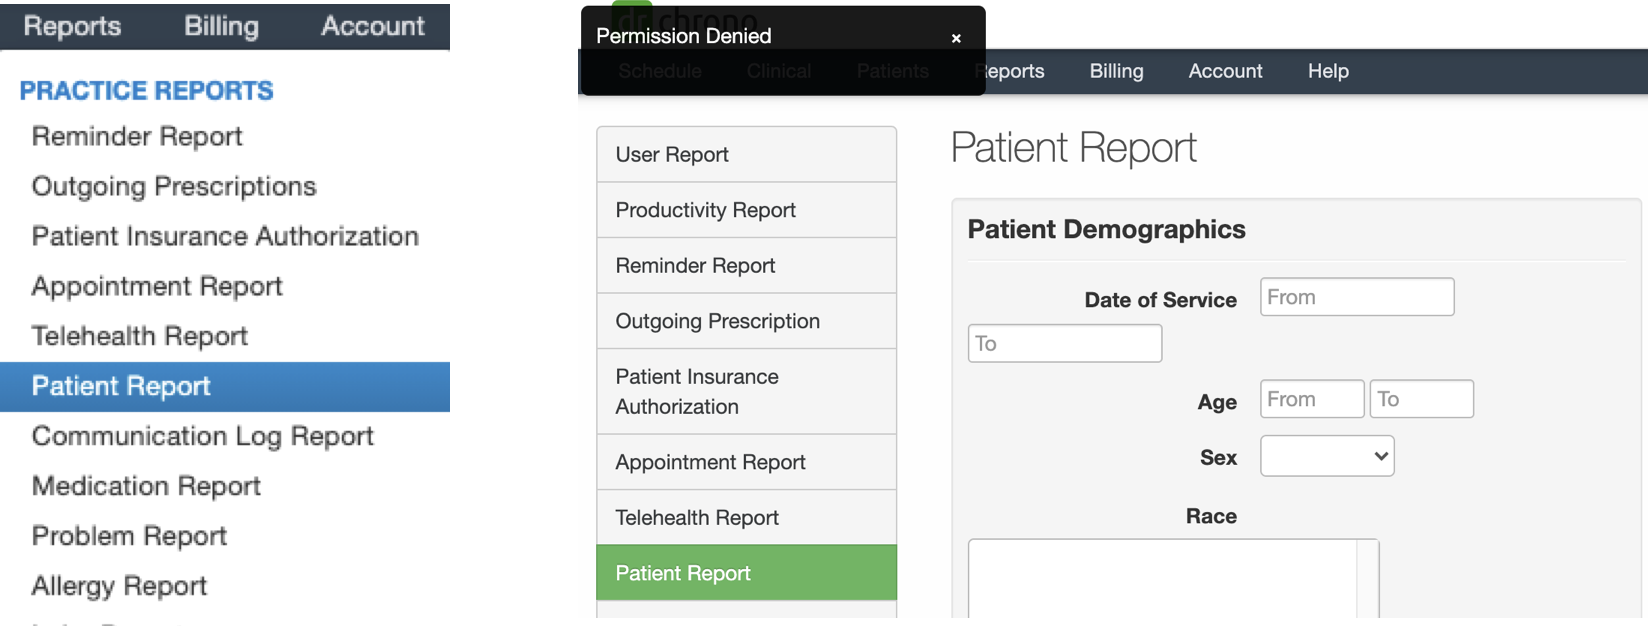 Patient_Report_and_Permission_Denied_Side_by_side.png